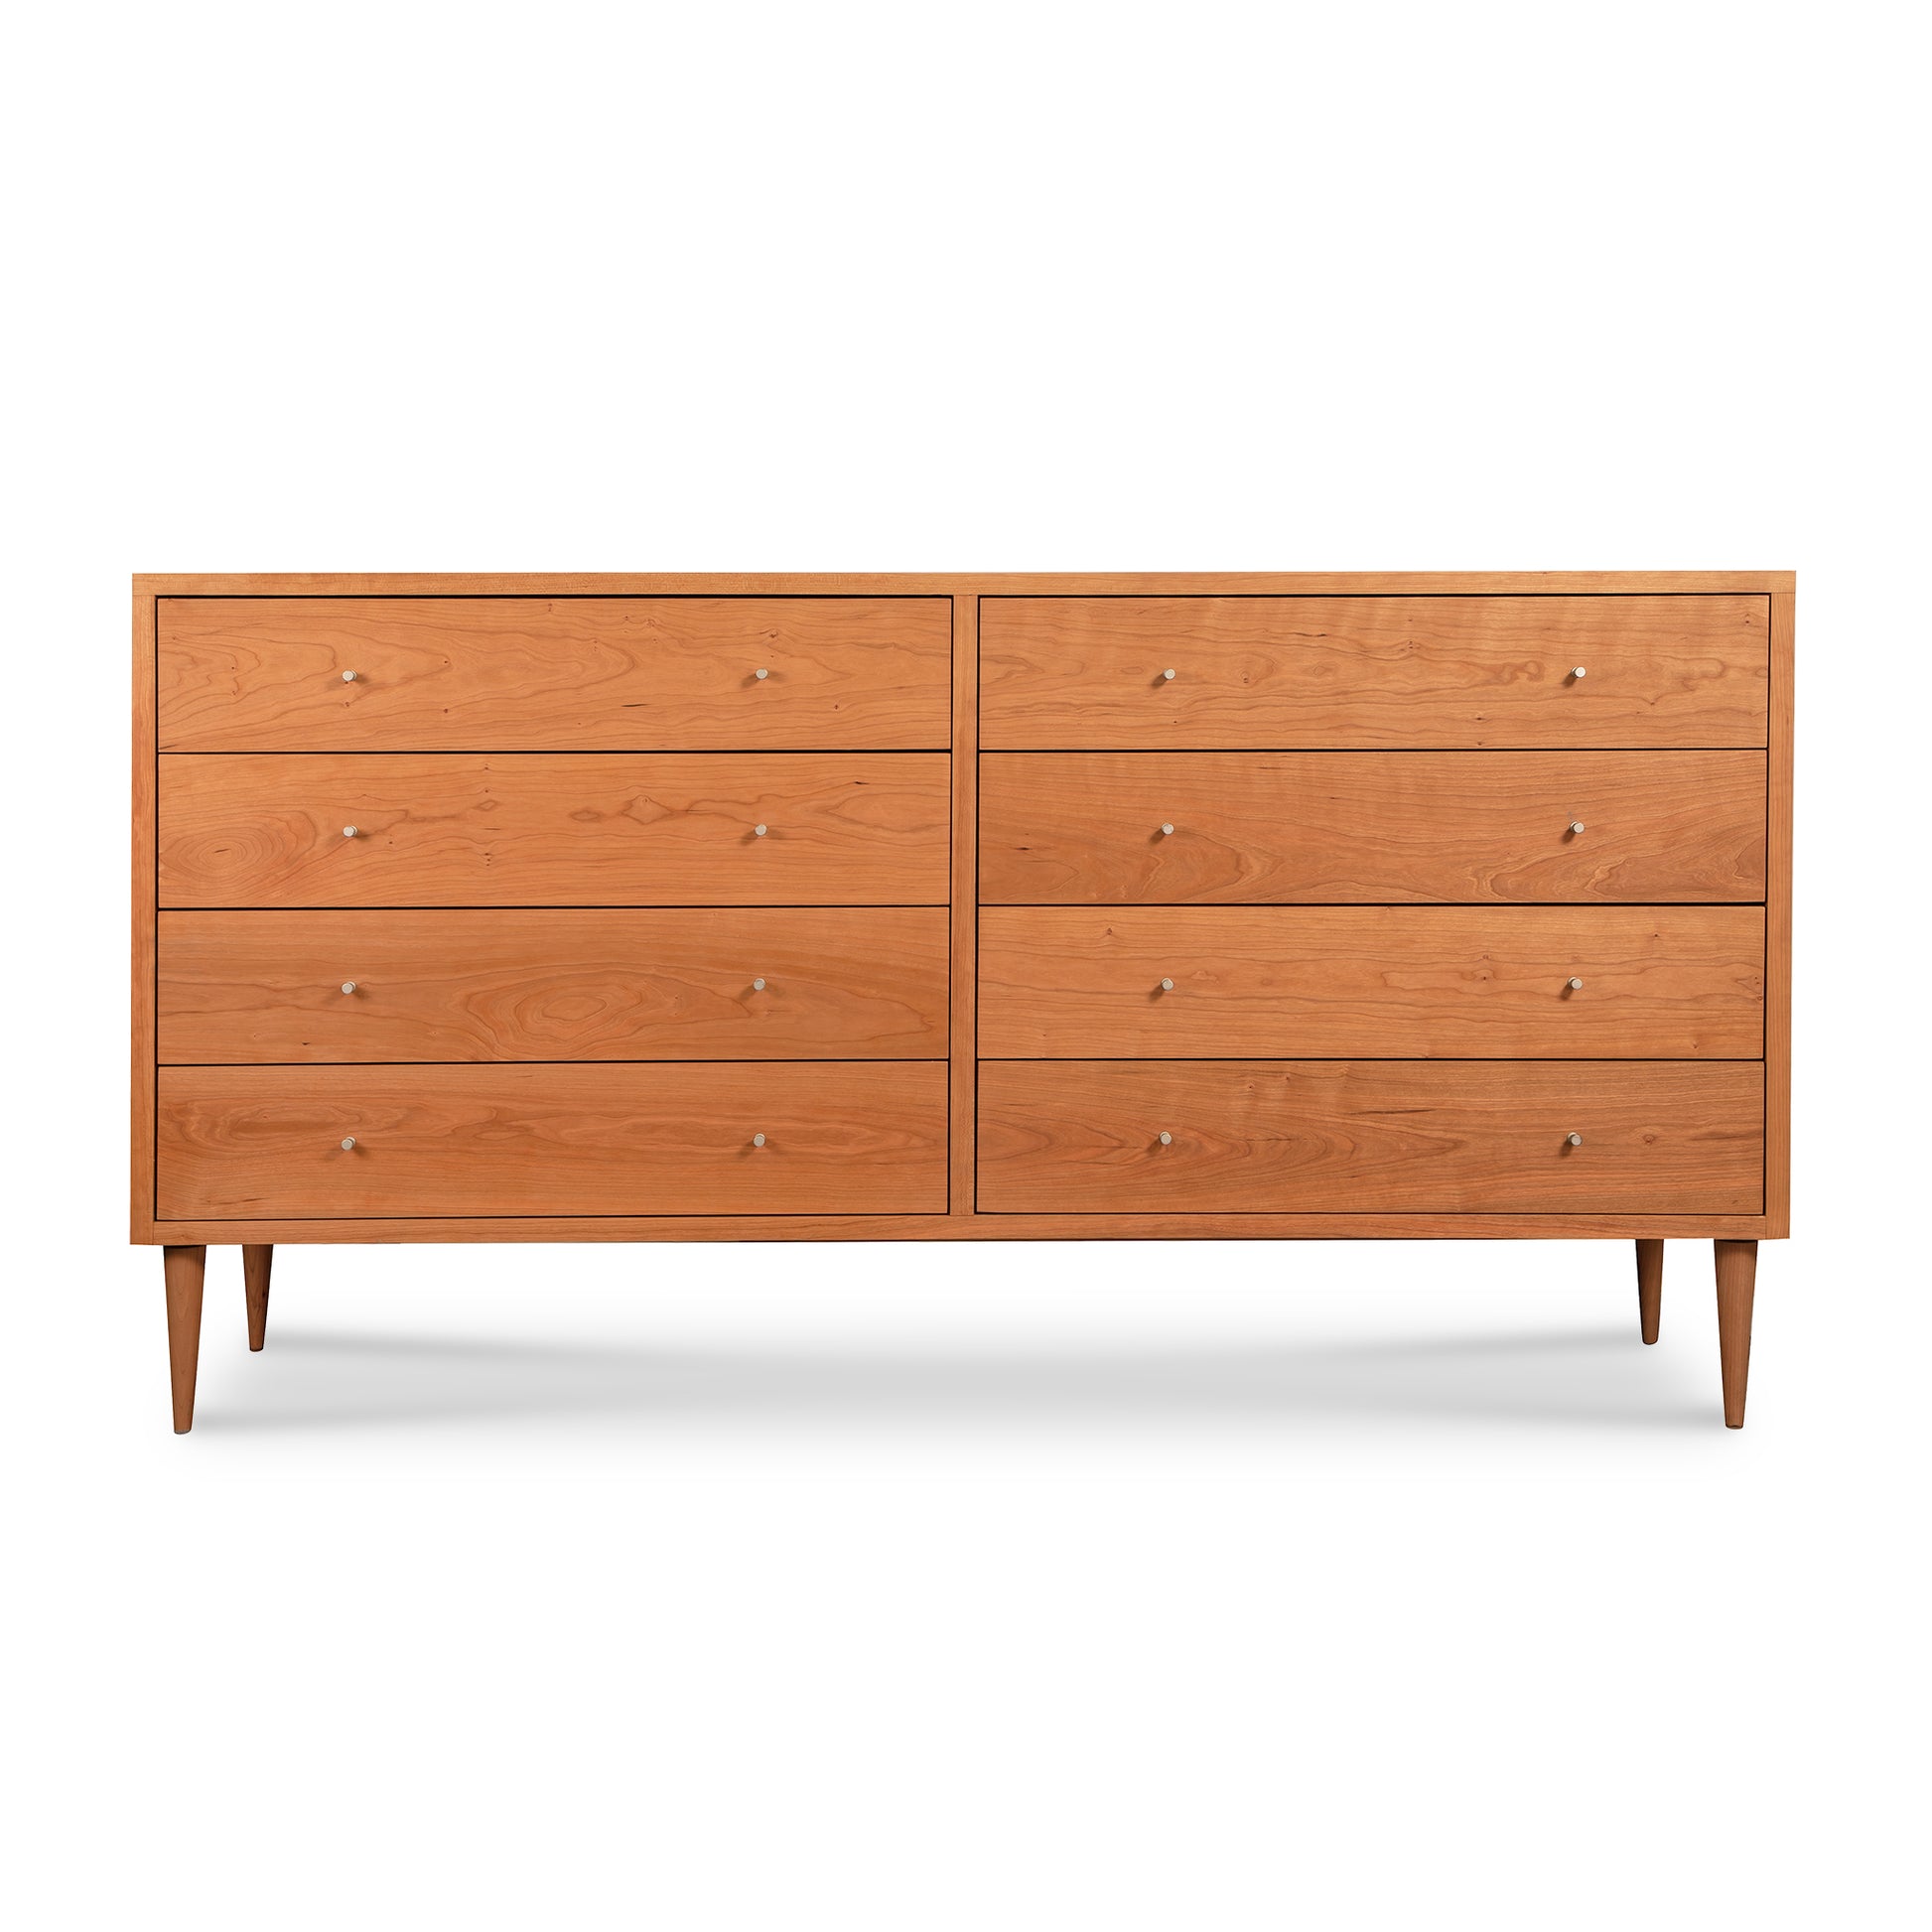 A Vermont Furniture Designs Larssen 8-Drawer Dresser, with a solid wood mid-century modern design, standing on four angled legs against a white background.